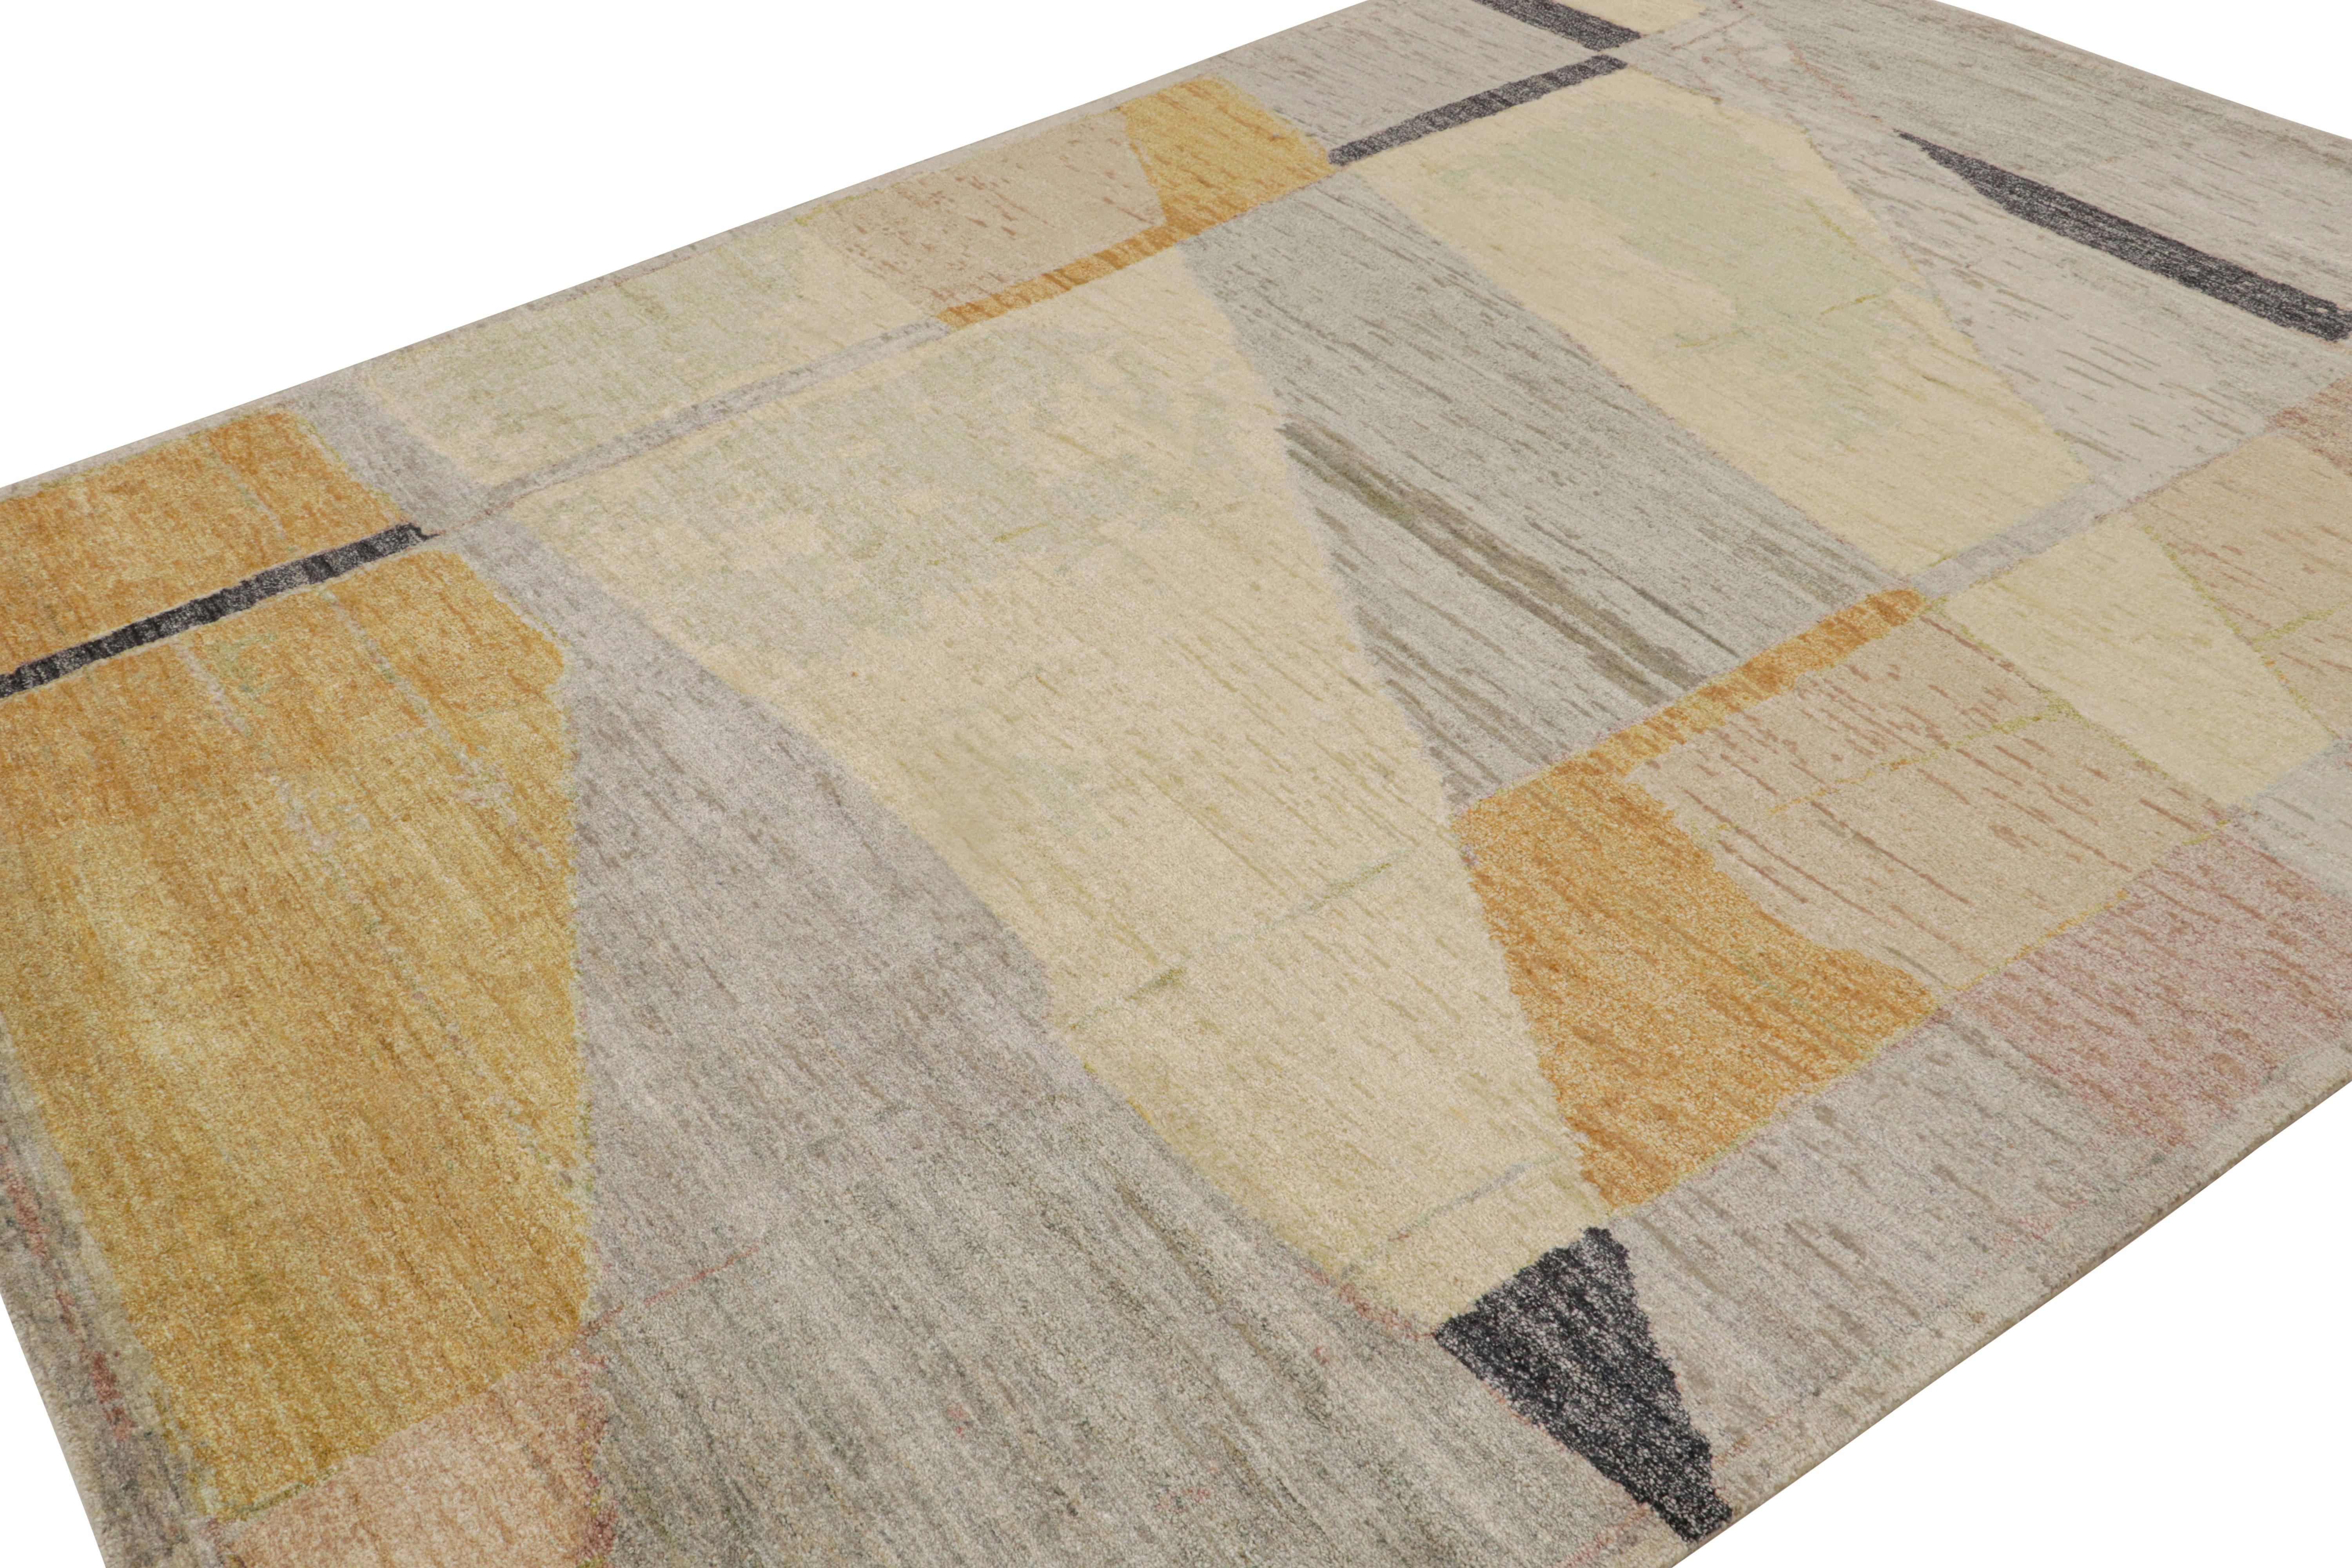 Hand-knotted in silk, this 8×10 modern abstract rug by Rug & Kilim is an expressive piece yet clearly inspired by abstract minimalist sensibilities 

On the Design: 

Light and playful colors underscore sharp geometric patterns with an edge both